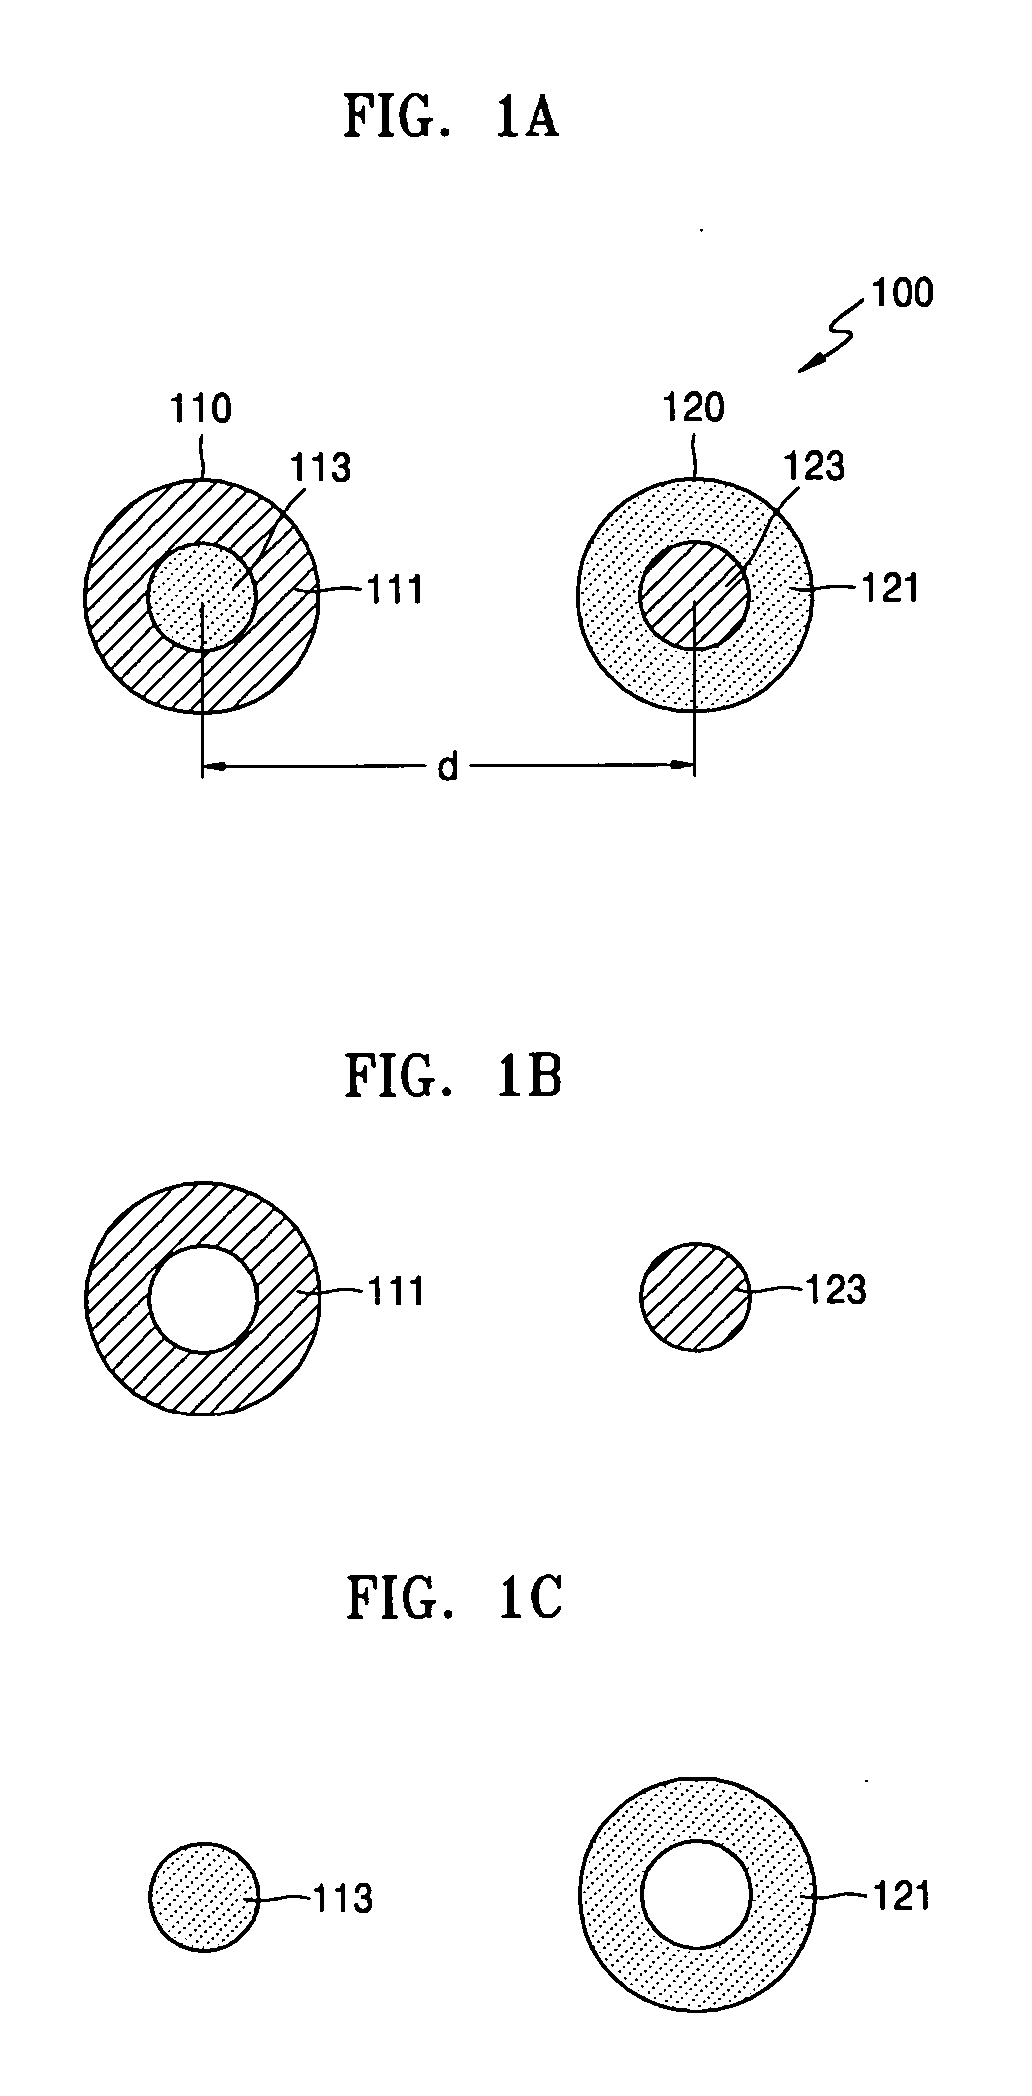 Apparatus and method for estimating a position and an orientation of a mobile robot